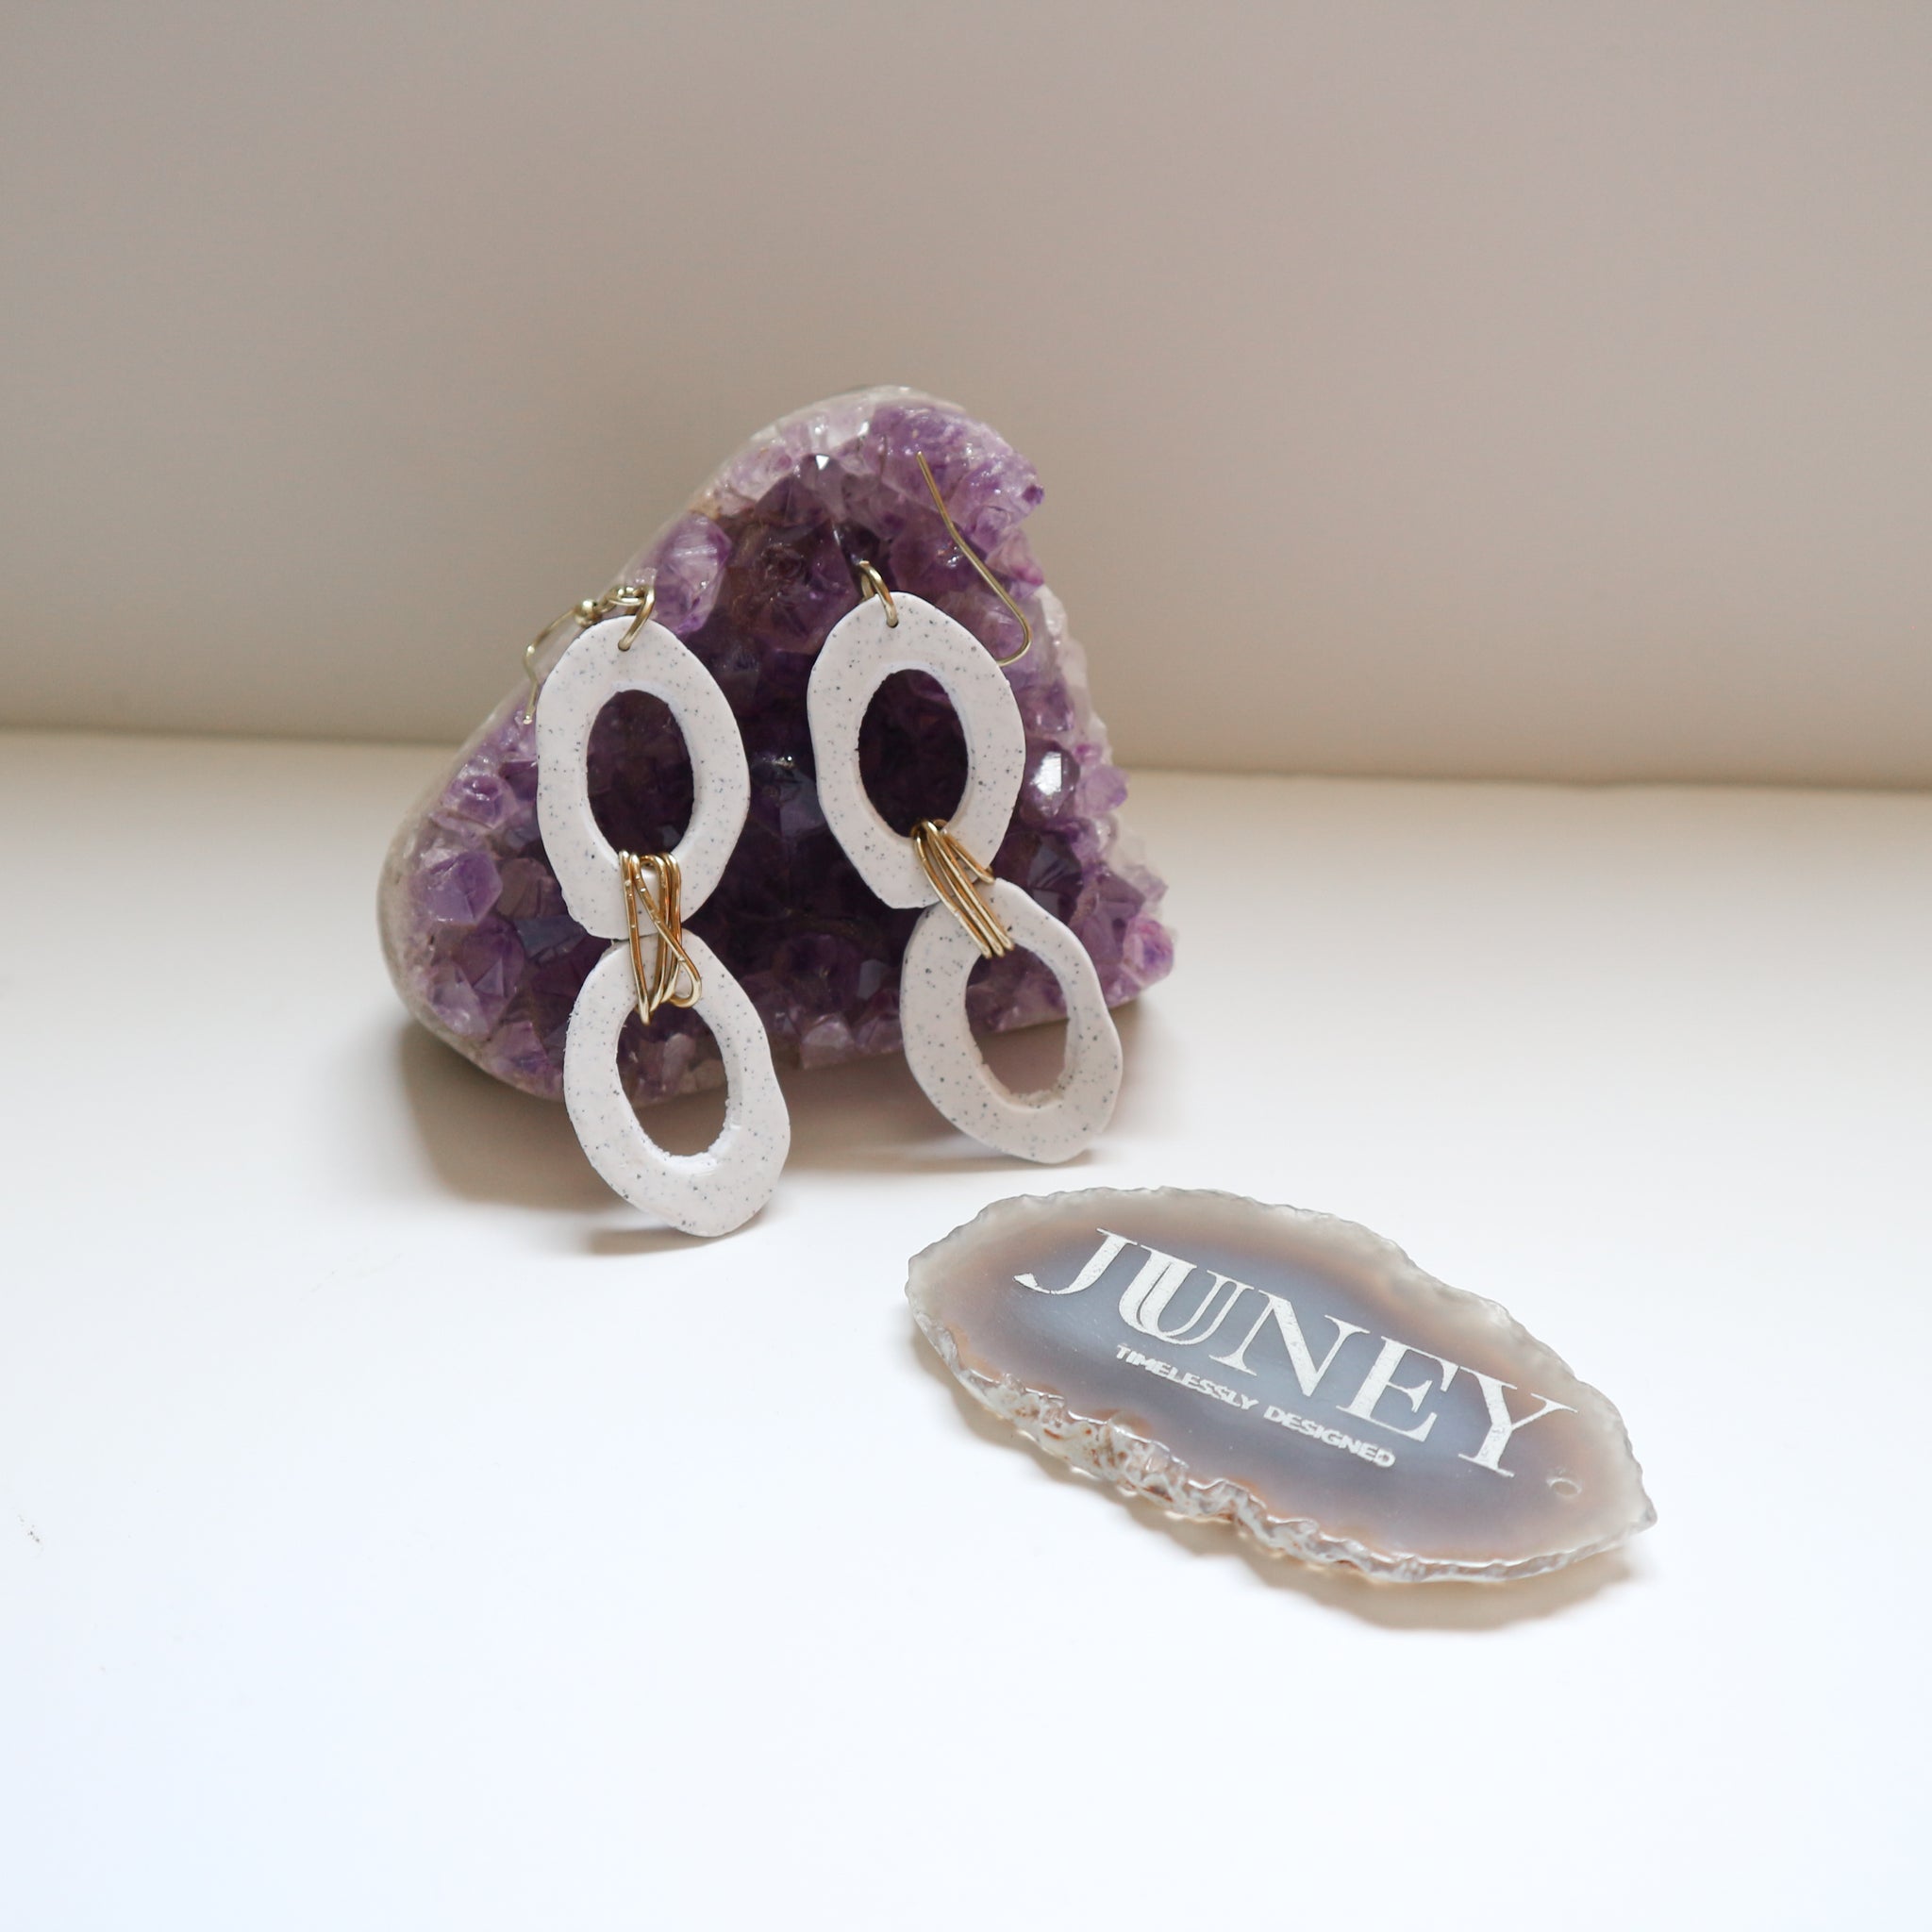 earrings hanging from crystal rock next to engraved agate